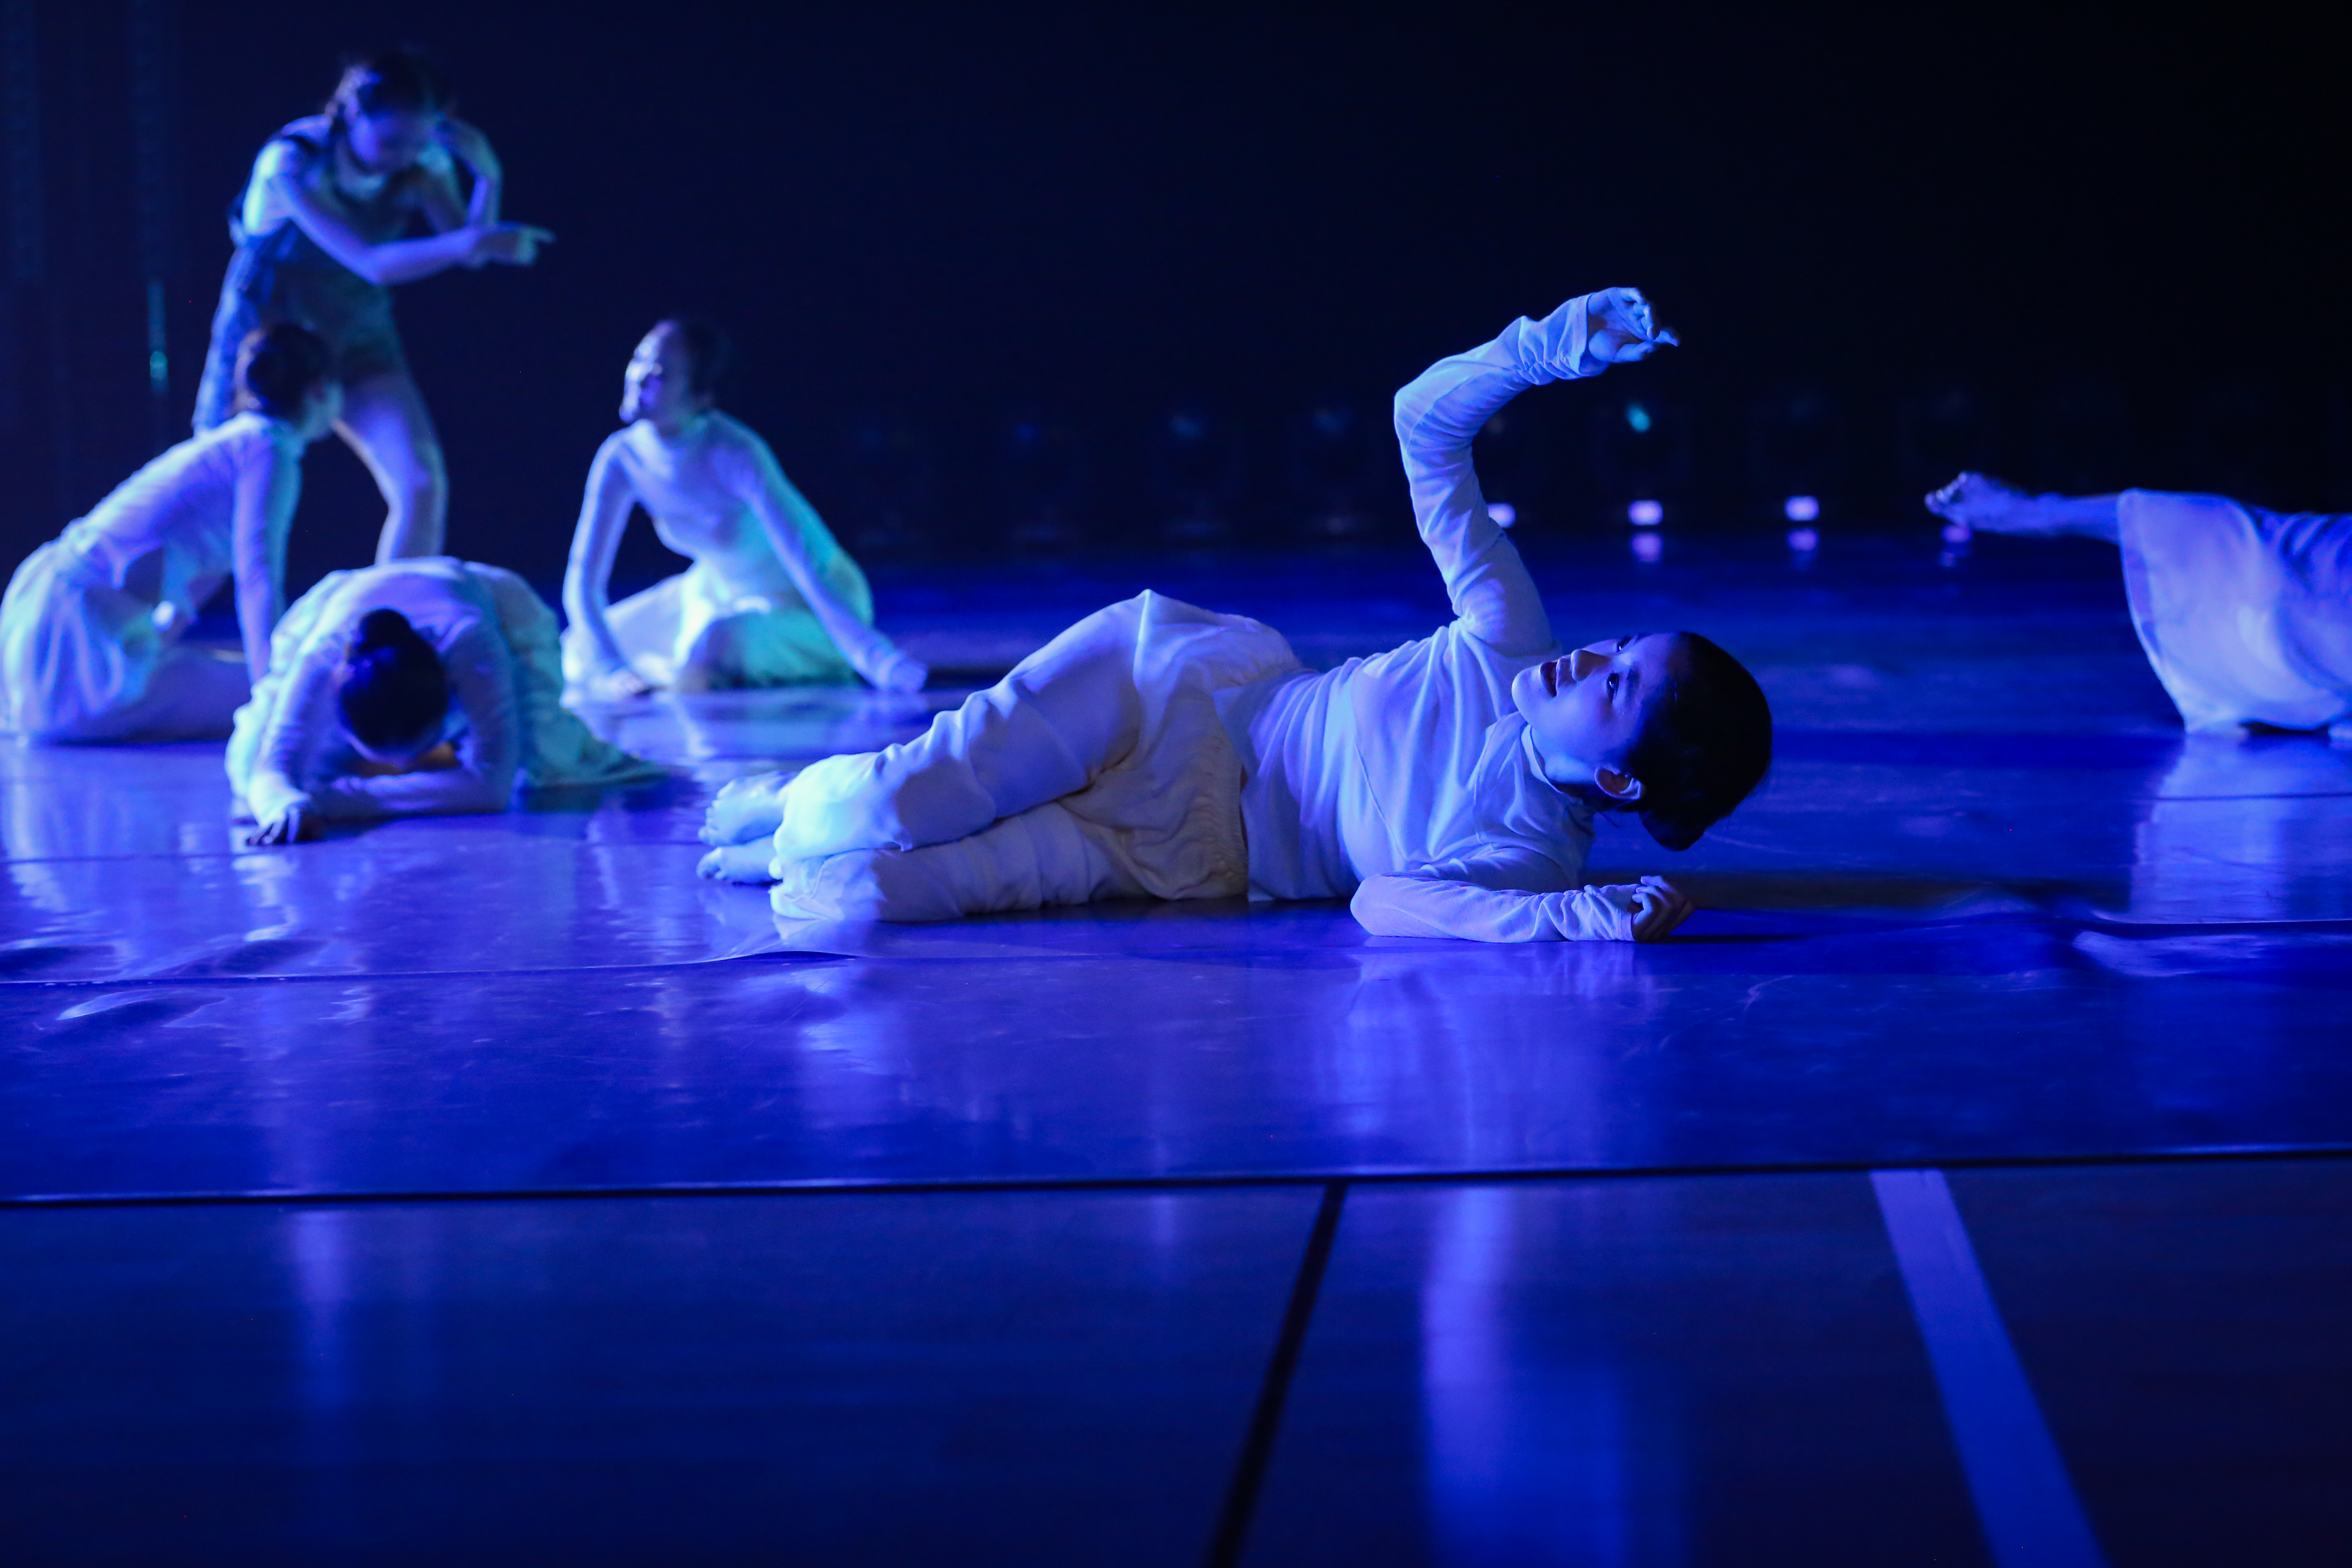 Dancer lays on floor while other dancers move in background